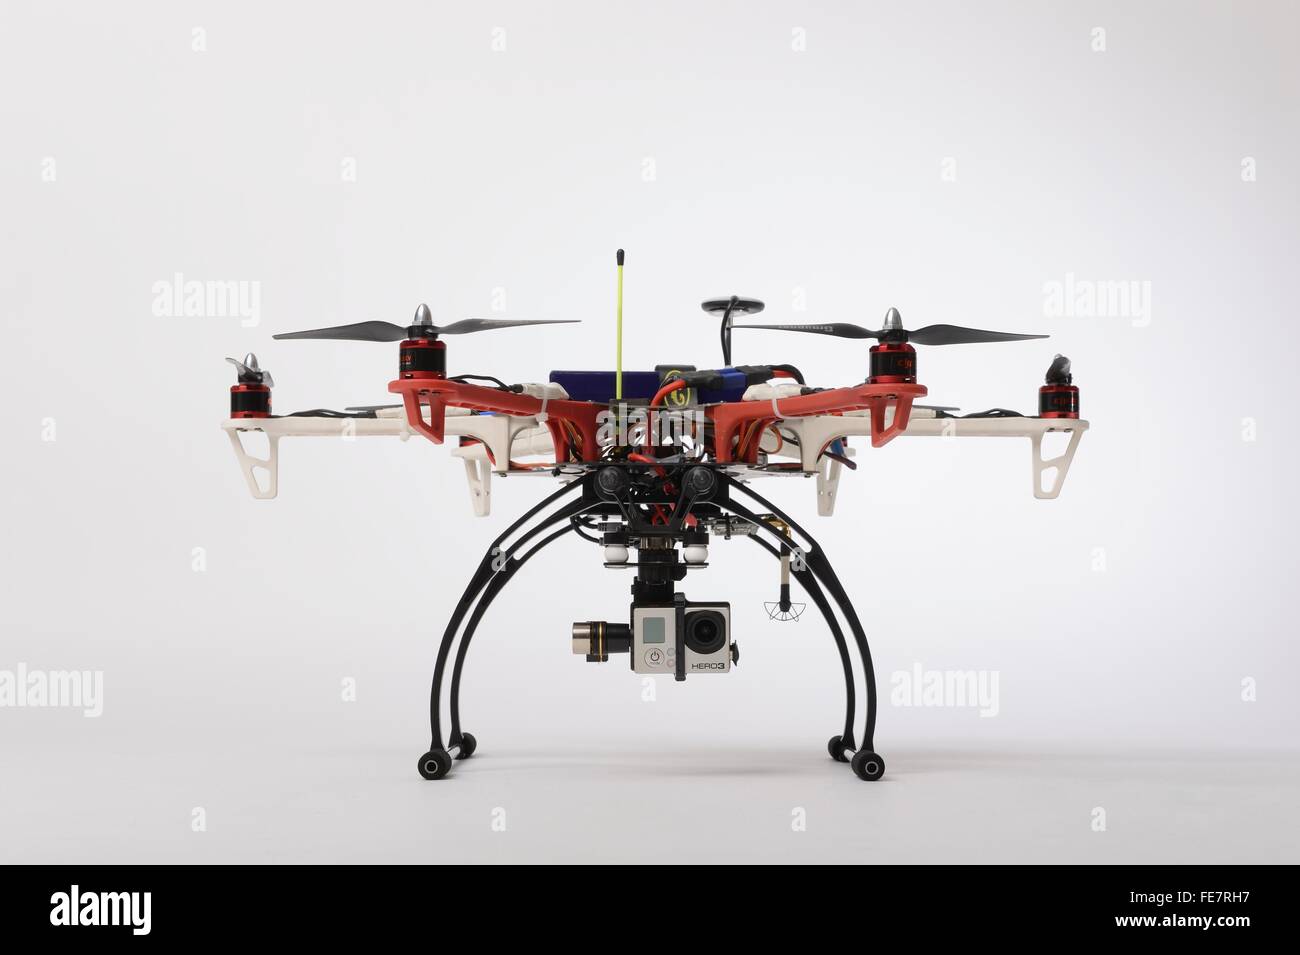 Small multirotor drone of the hexacopter type equipped with a stabilized gimbal holding a GoPro  typically used by hobbyists Stock Photo